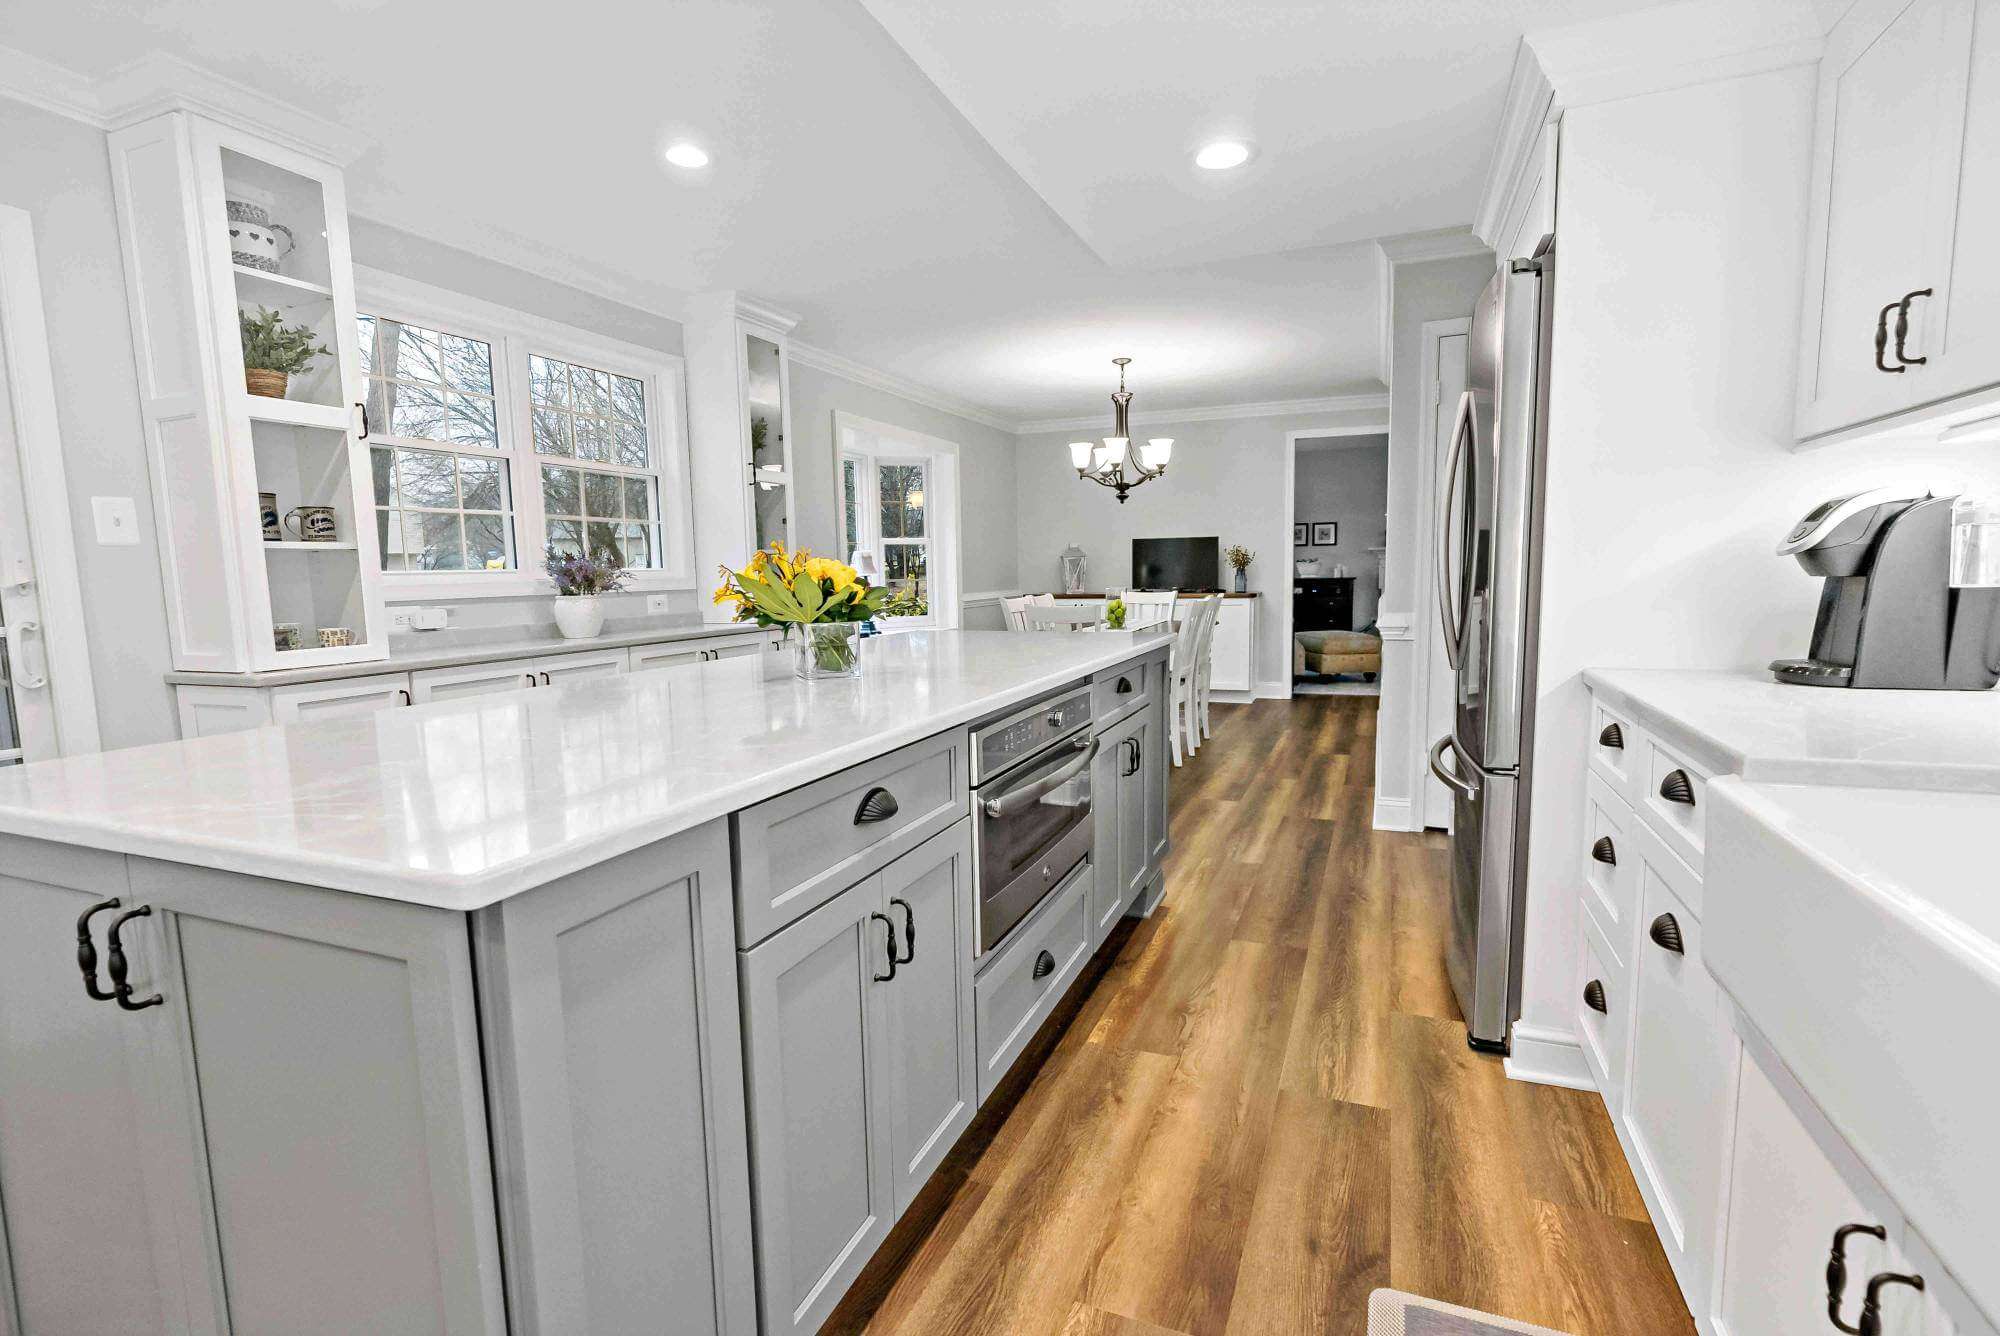 White and grey cabinetry with black handles in kitchen